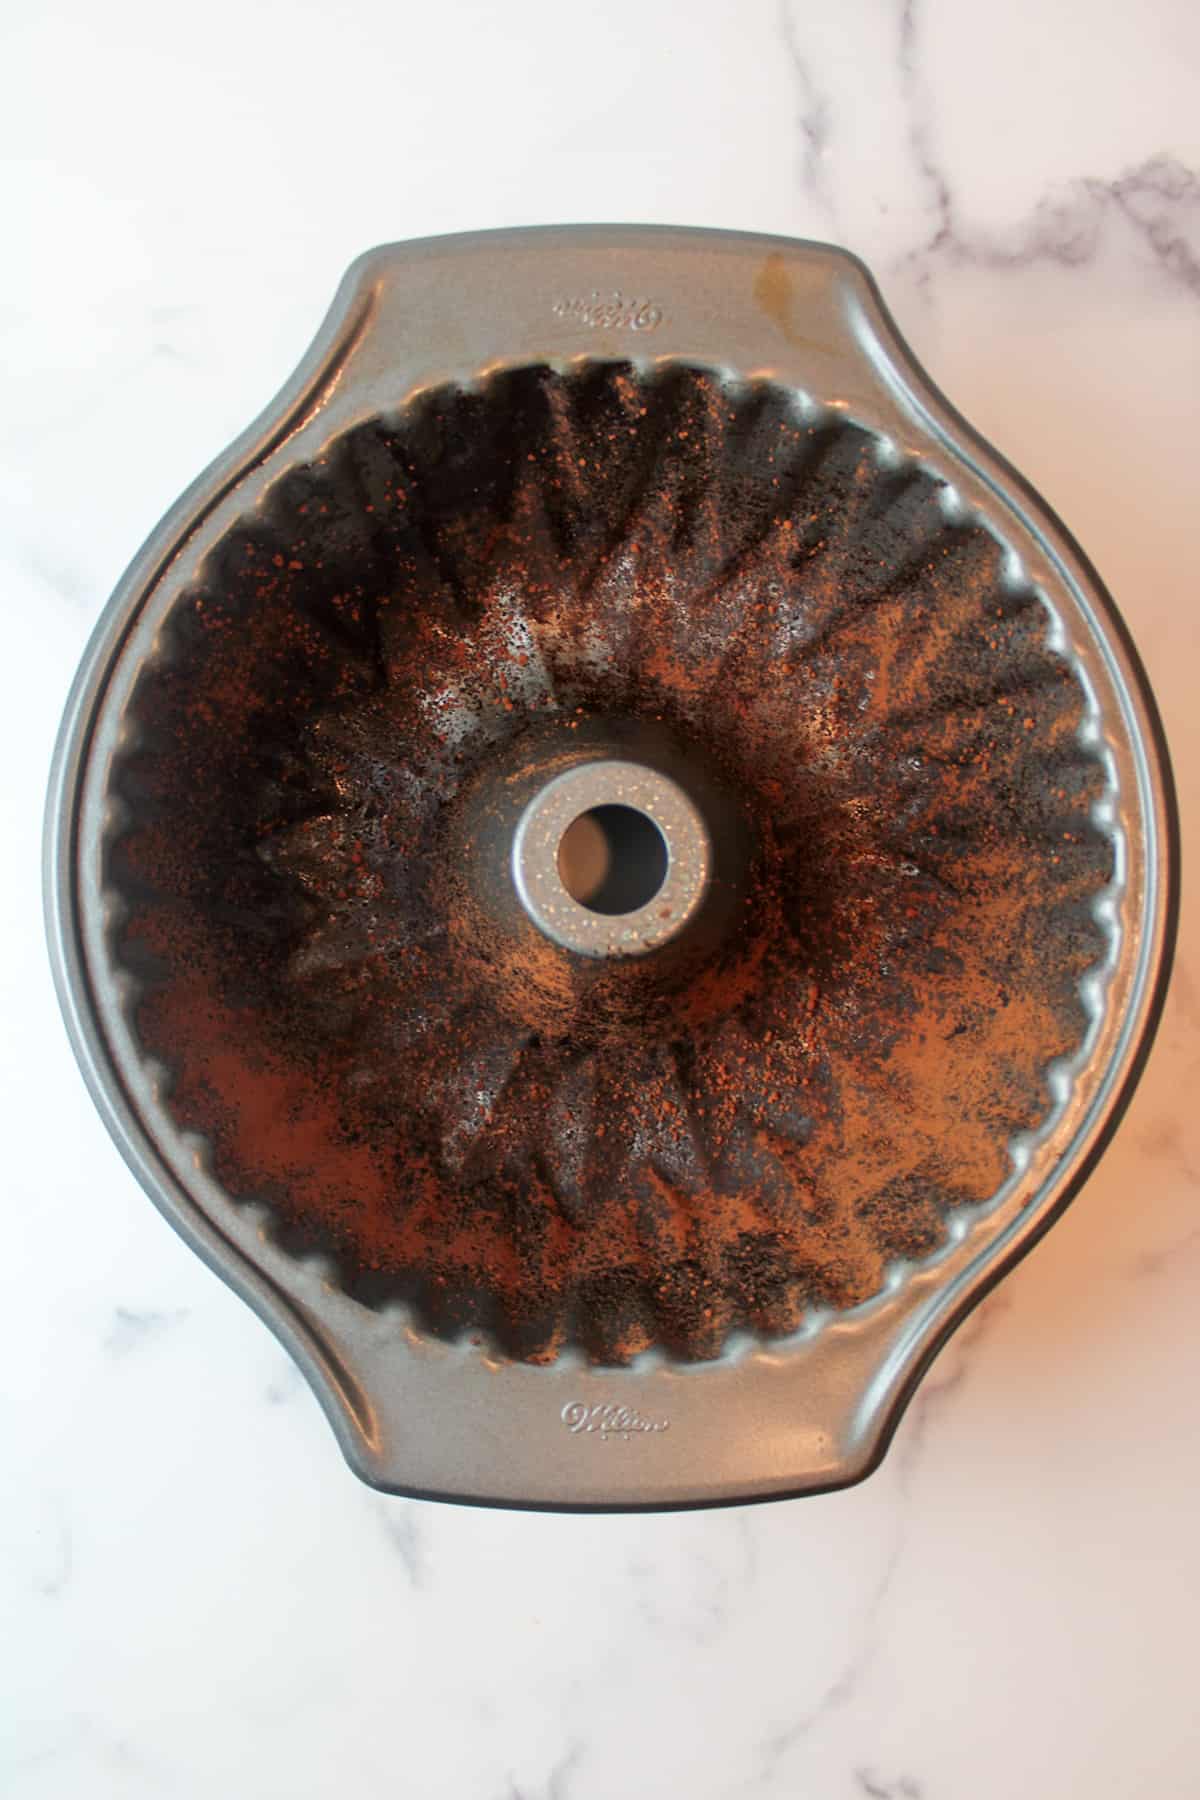 cocoa powder dusted bundt pan.